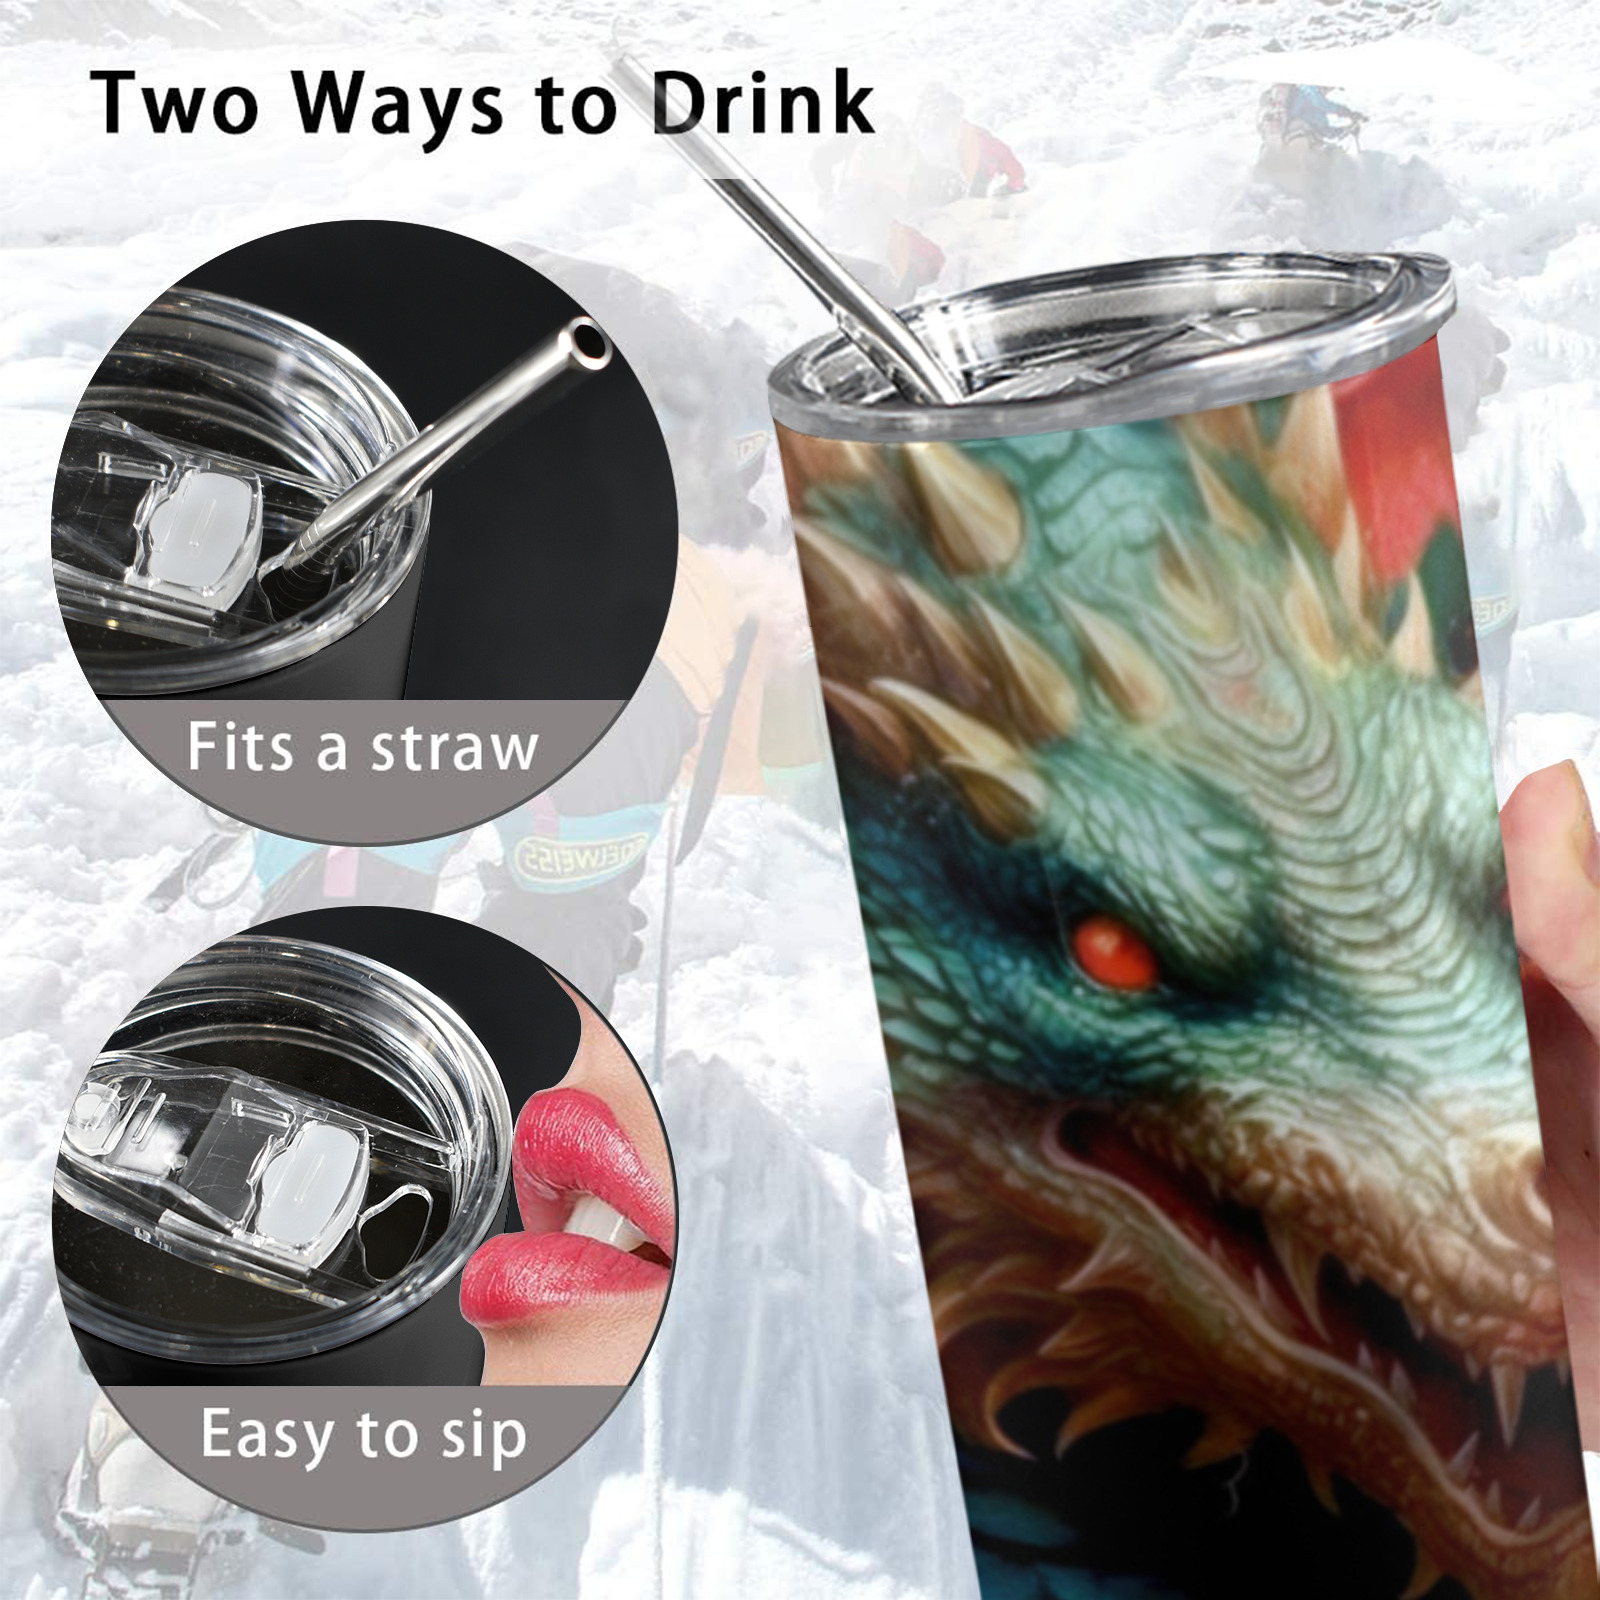 Dragon world tumbler 20oz Tall Skinny Tumbler with Lid and Straw